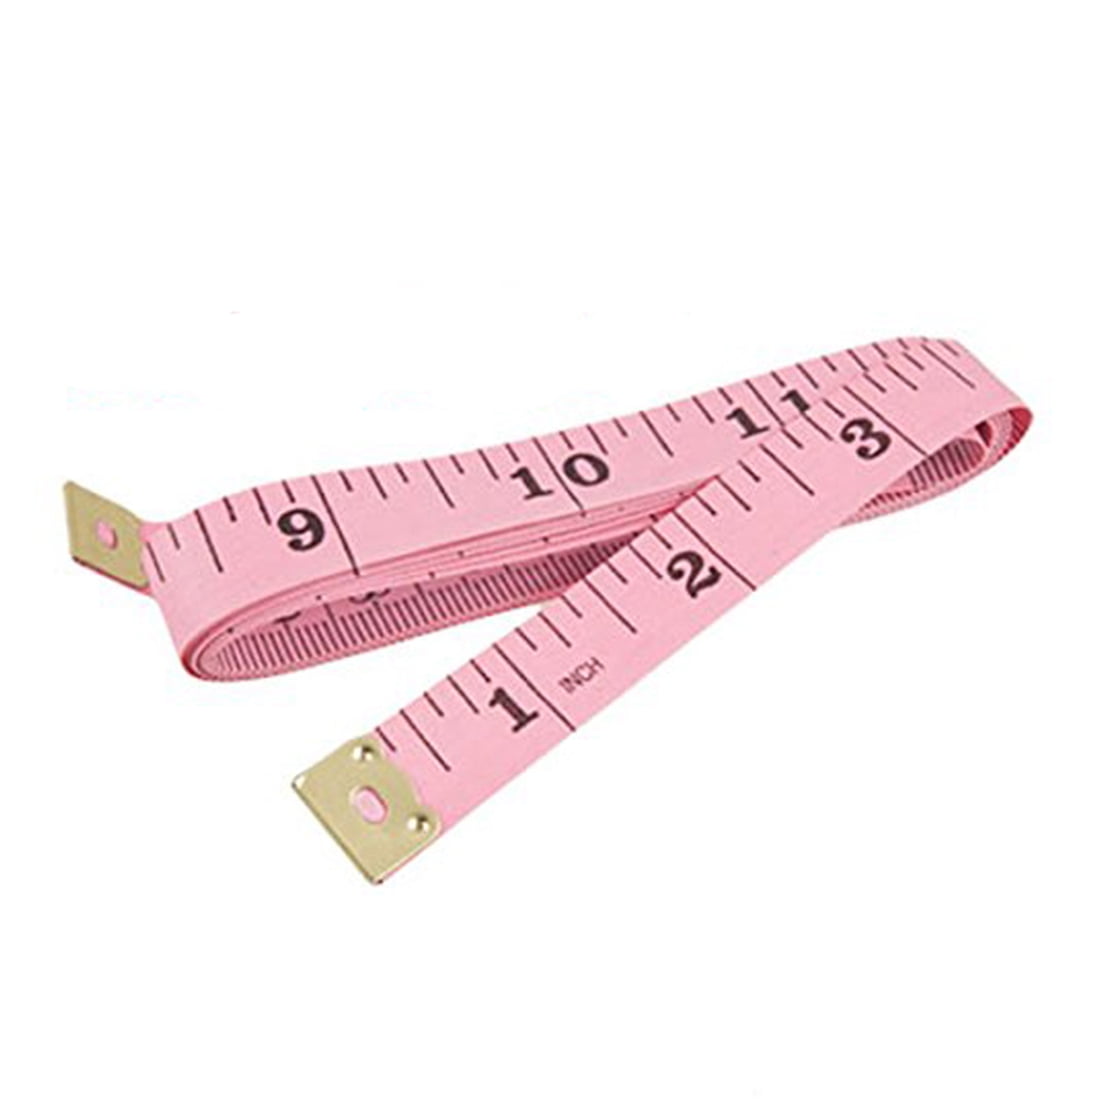 Tape Measure Tapeline Kids Retractable Birthday Party Favor Measuring Ruler Construction Toys Simple Learning Fillers, Size: 7.09 x 4.72 x 1.97